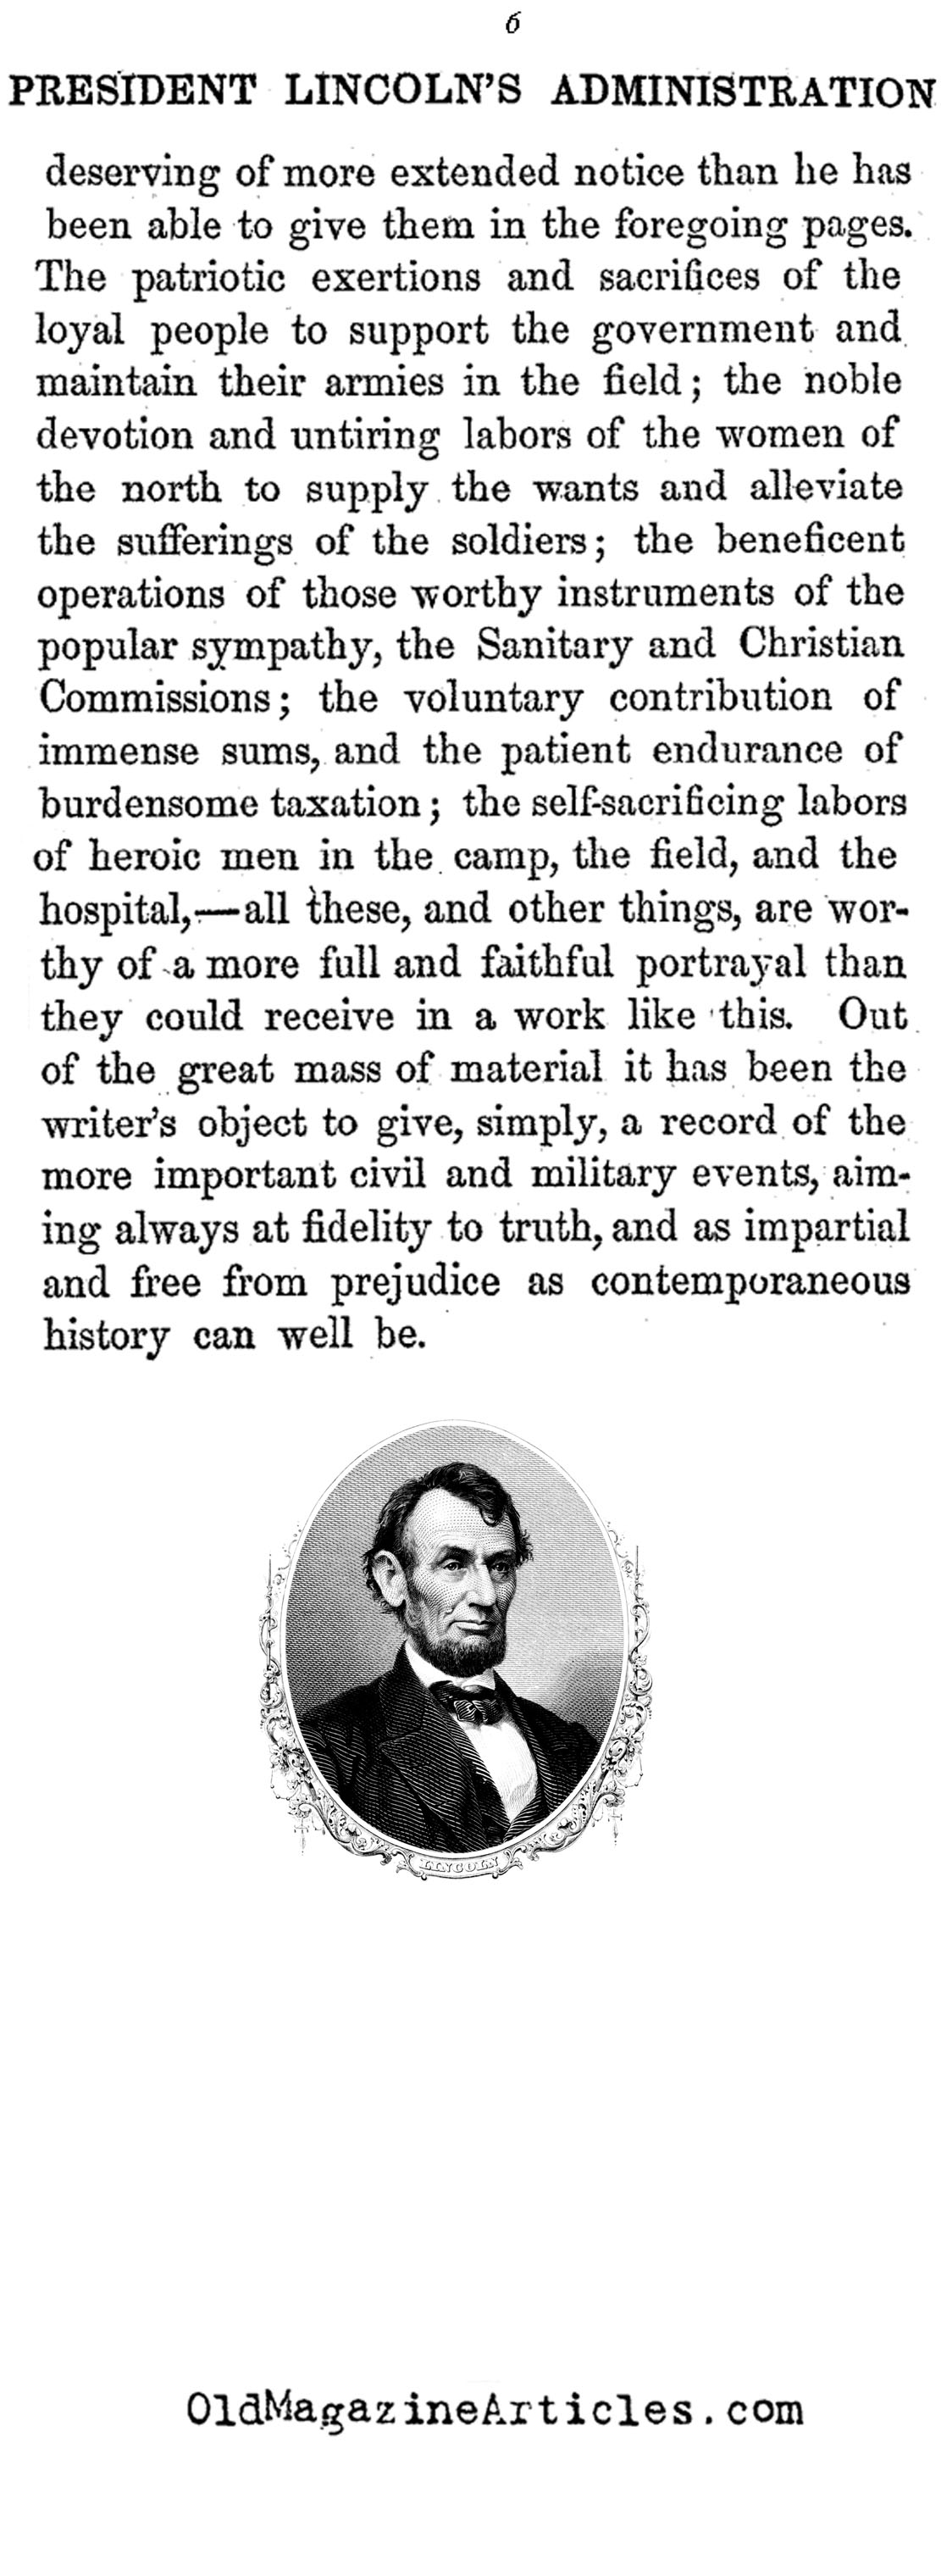 The Lincoln Assassination  Conspiracy (The Southern Rebellion, 1867)